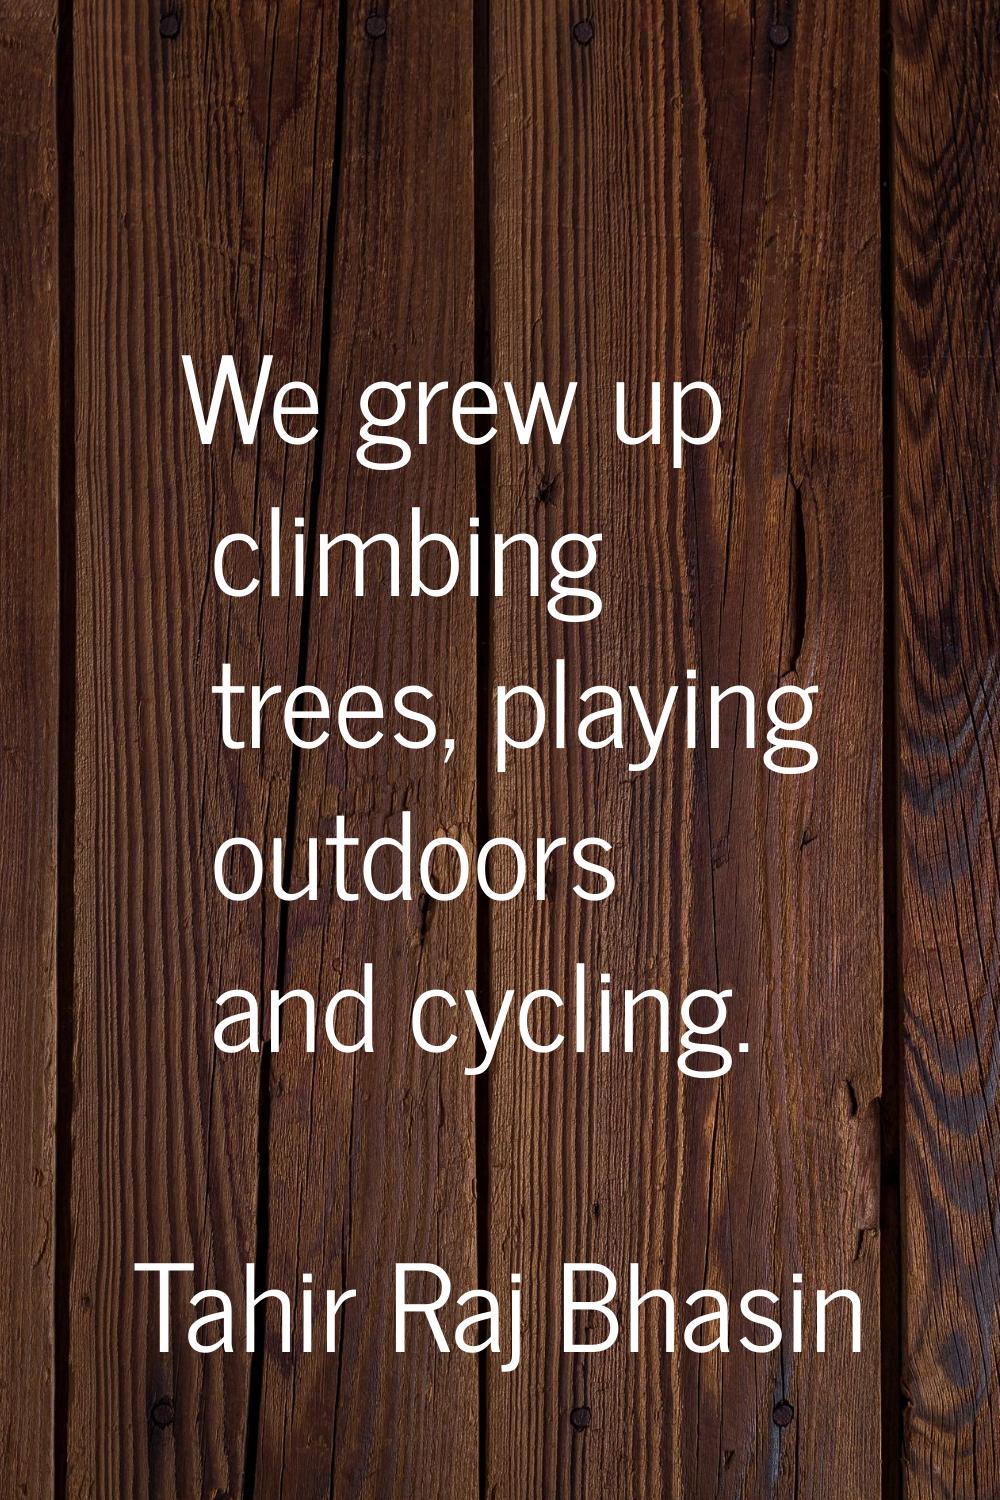 We grew up climbing trees, playing outdoors and cycling.